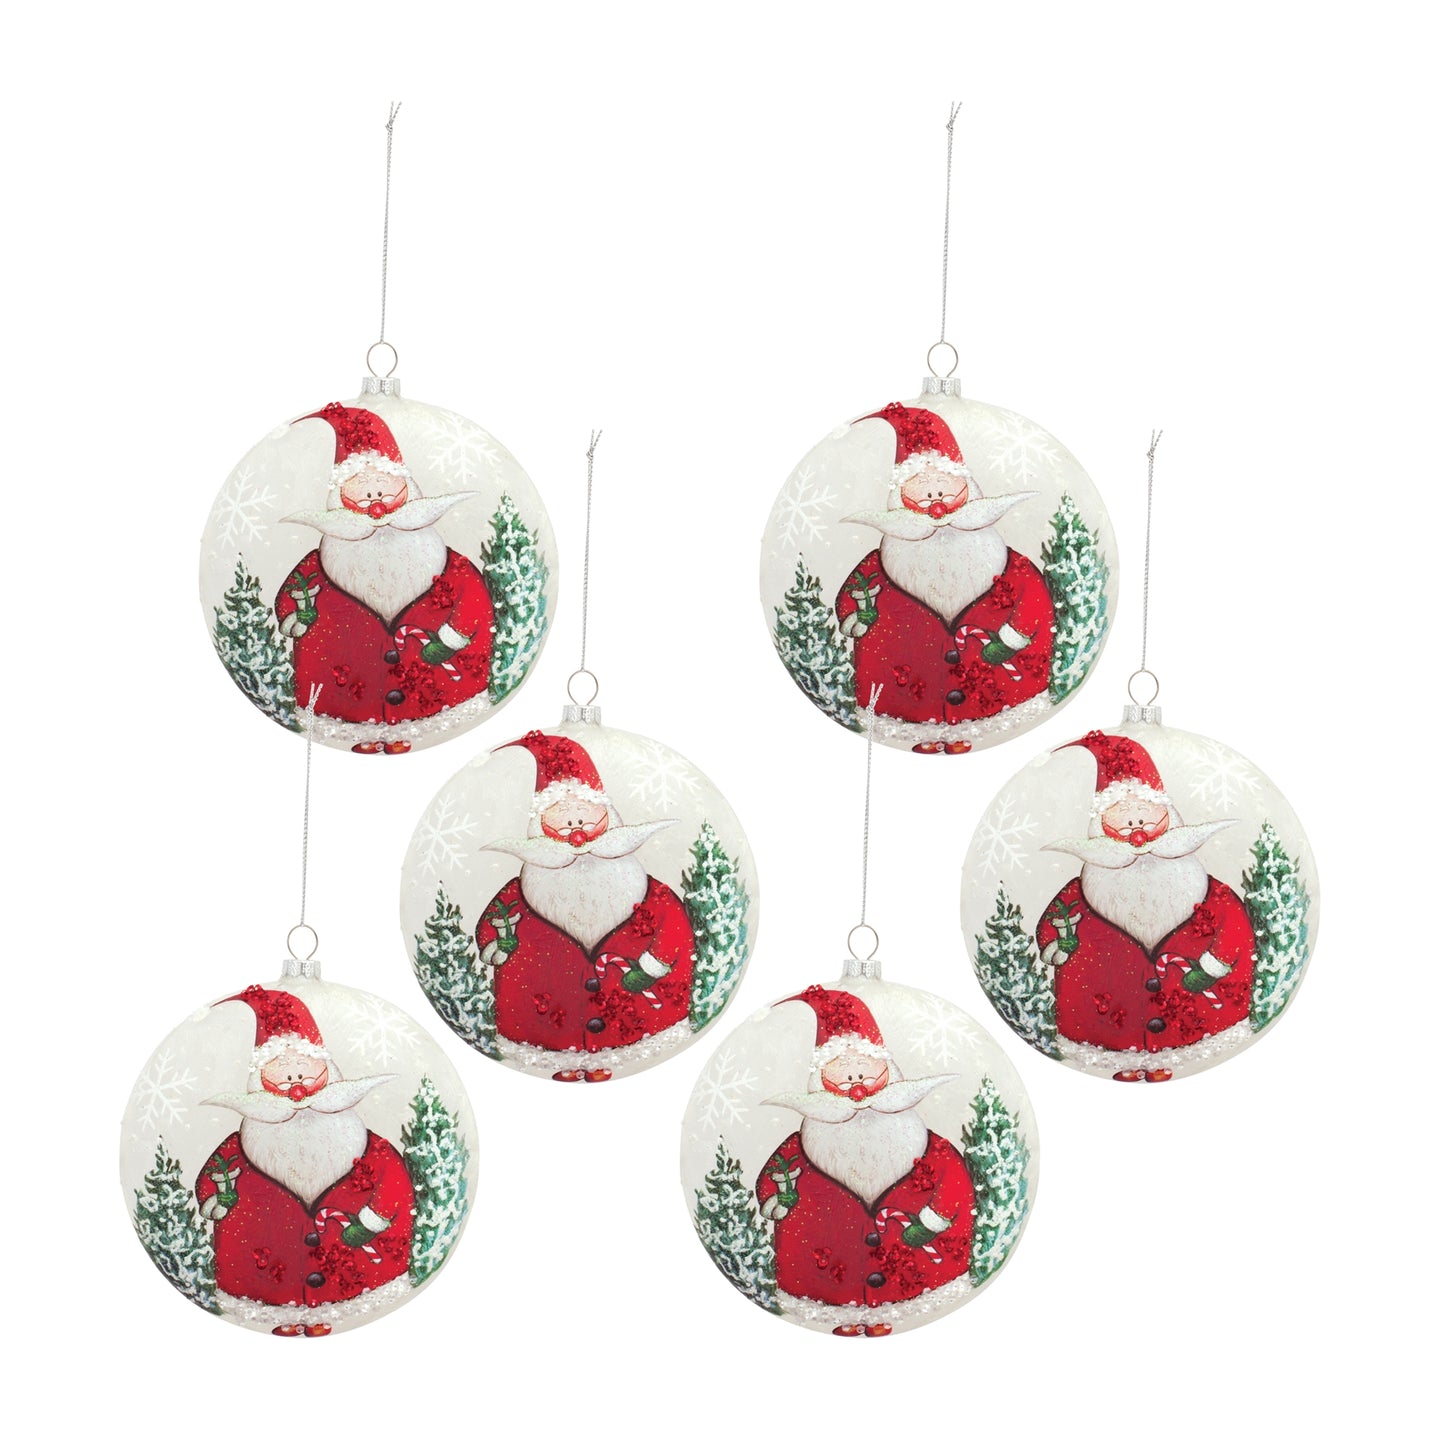 Whimsical Santa Disc Ornament with Snowy Scene (Set of 6)